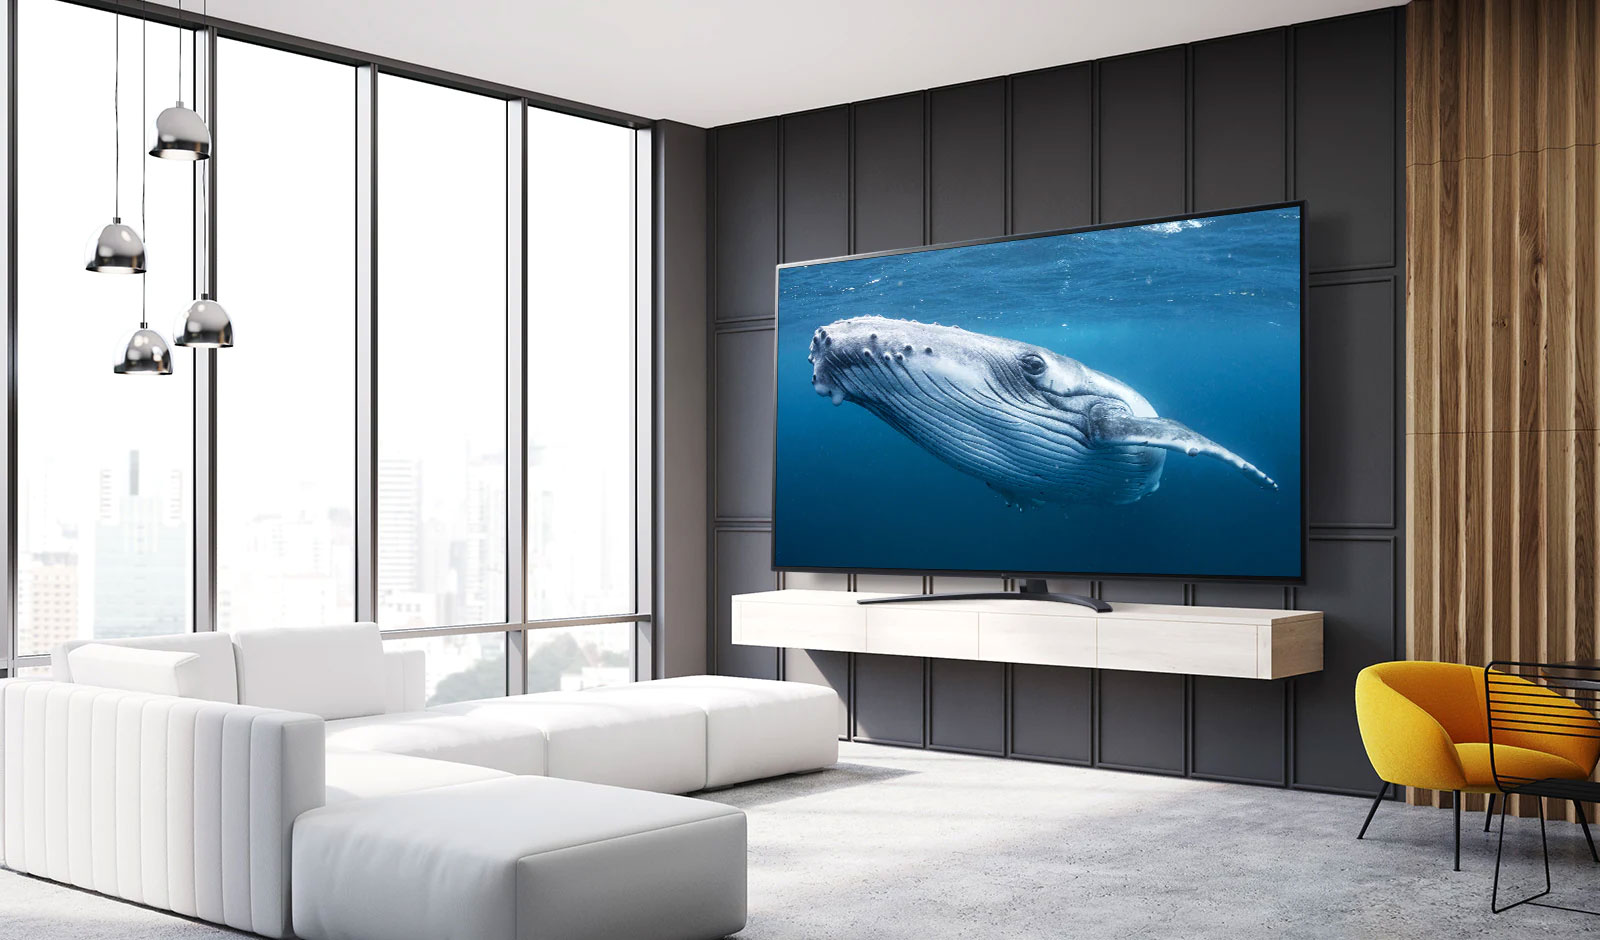 In a living room, there is a large screen TV displaying an image of a big whale in the sea.